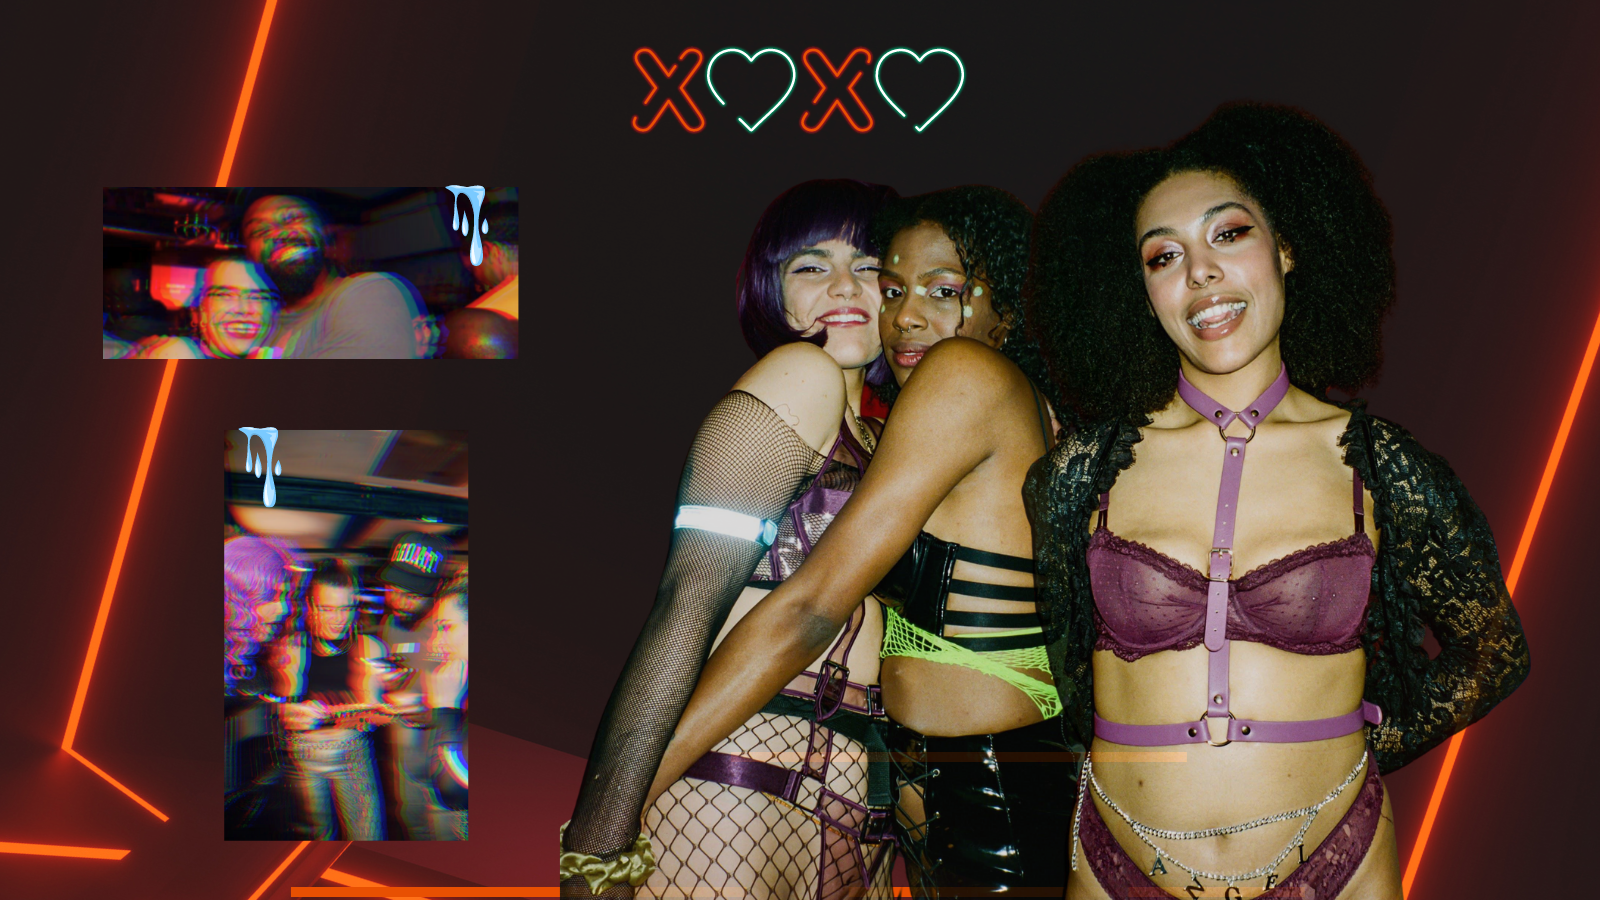 A  background with red strobe lights and cut out images of kinksters at a play party. Two images are in boxes which are blurred and have water dripping from the edge. The other two photos are large cut-outs of femme kinksters. Two are hugging and the other person has their hands behind their back.